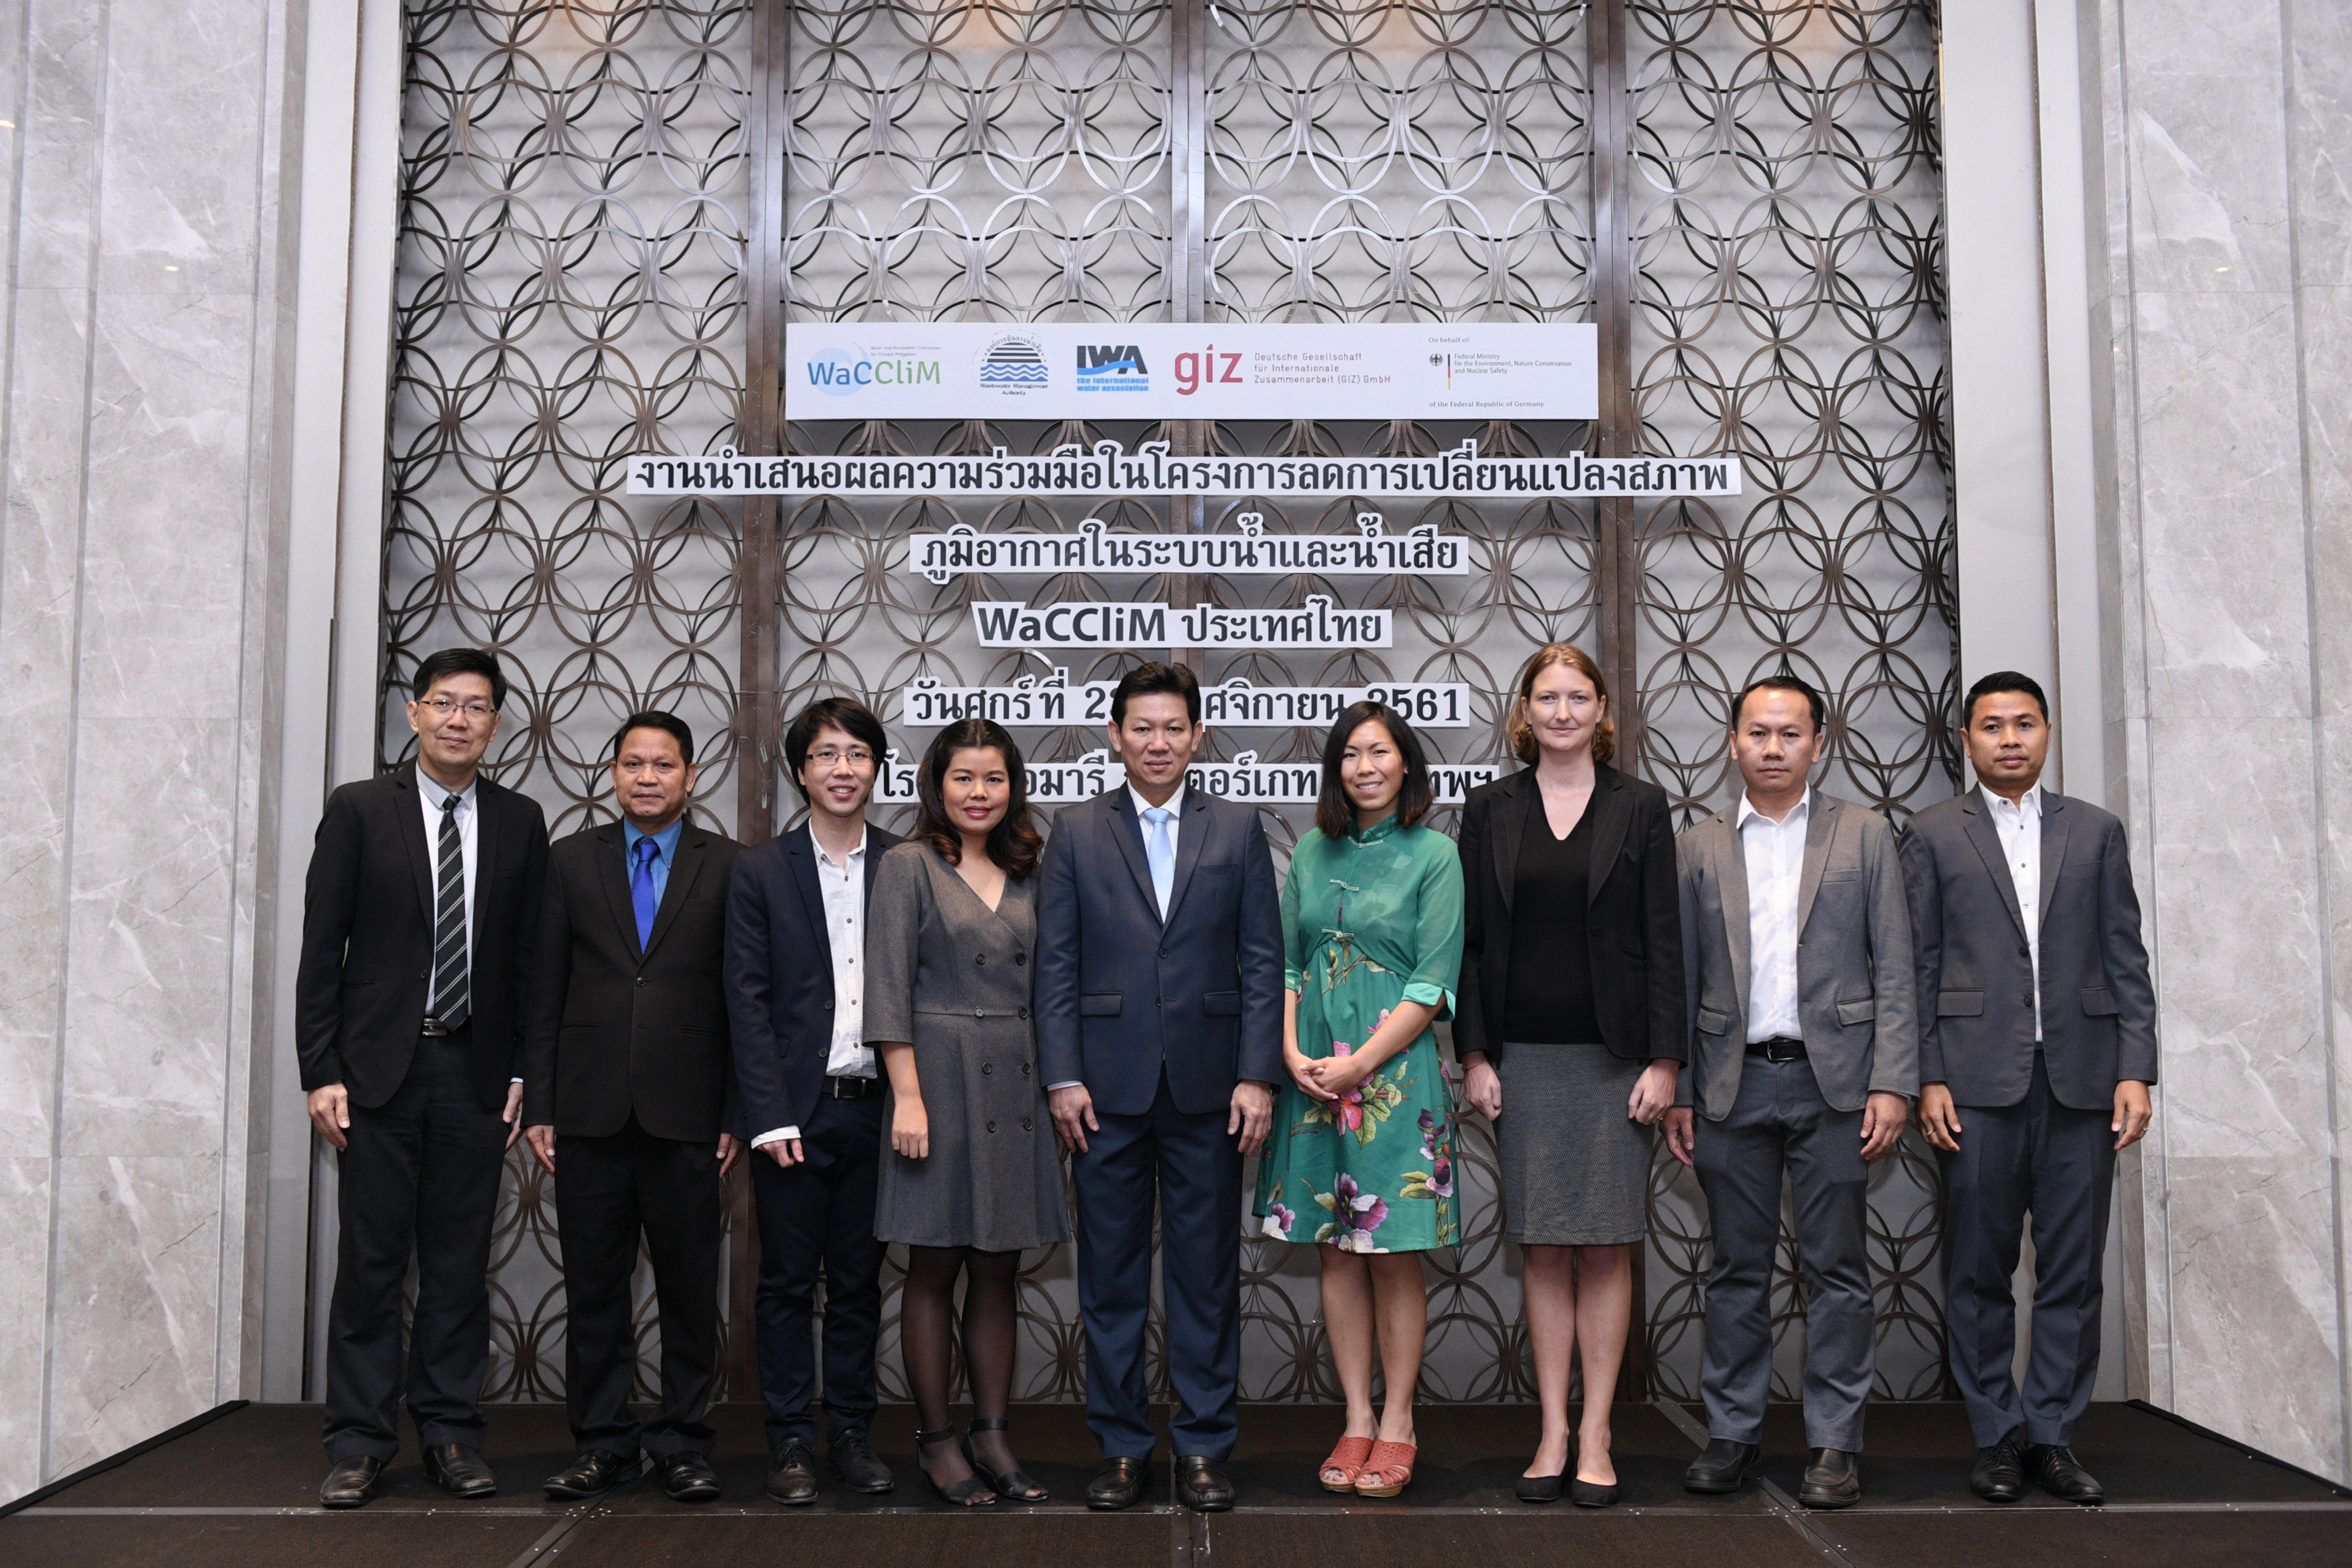 Thailand and Germany join up to support domestic wastewater management, moving Thailand towards becoming a low carbon society